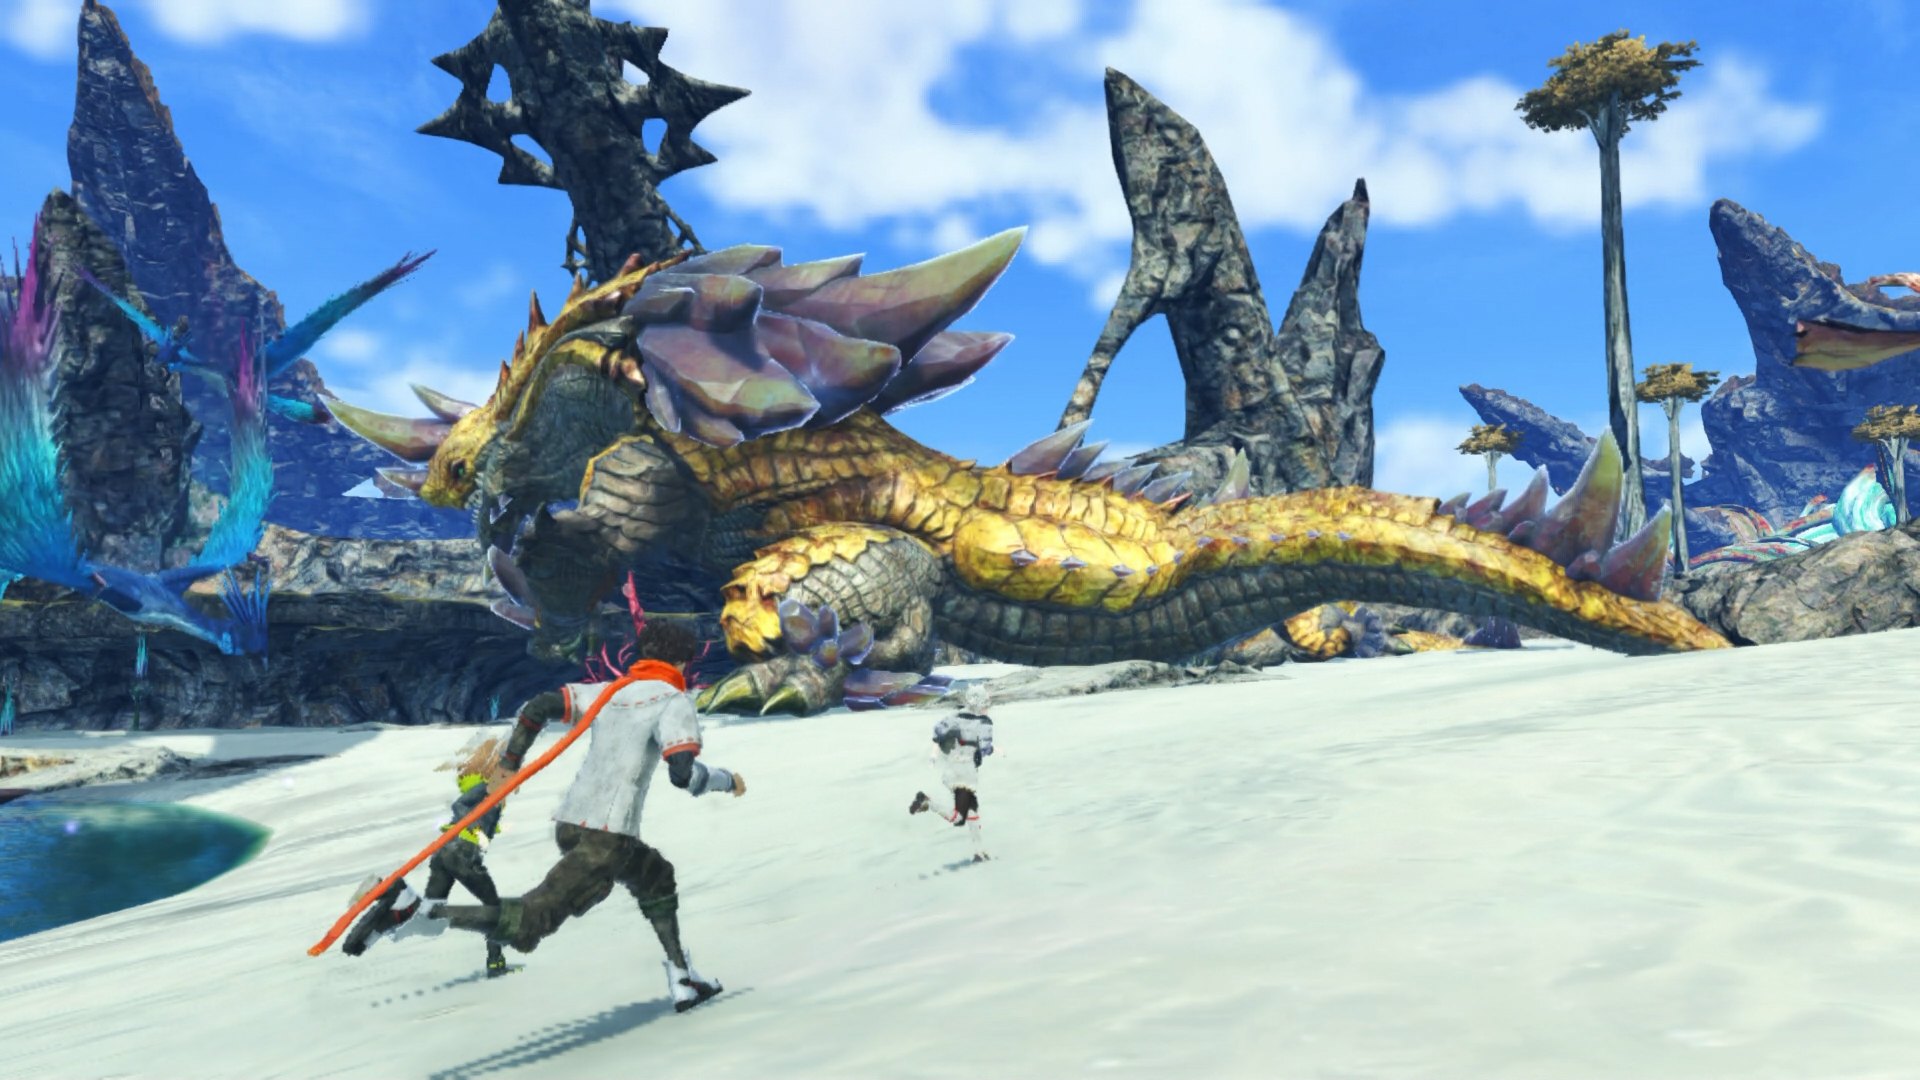 Not a JRPG without a big roaming dragon in the field to make you think you’ve taken a wrong turn